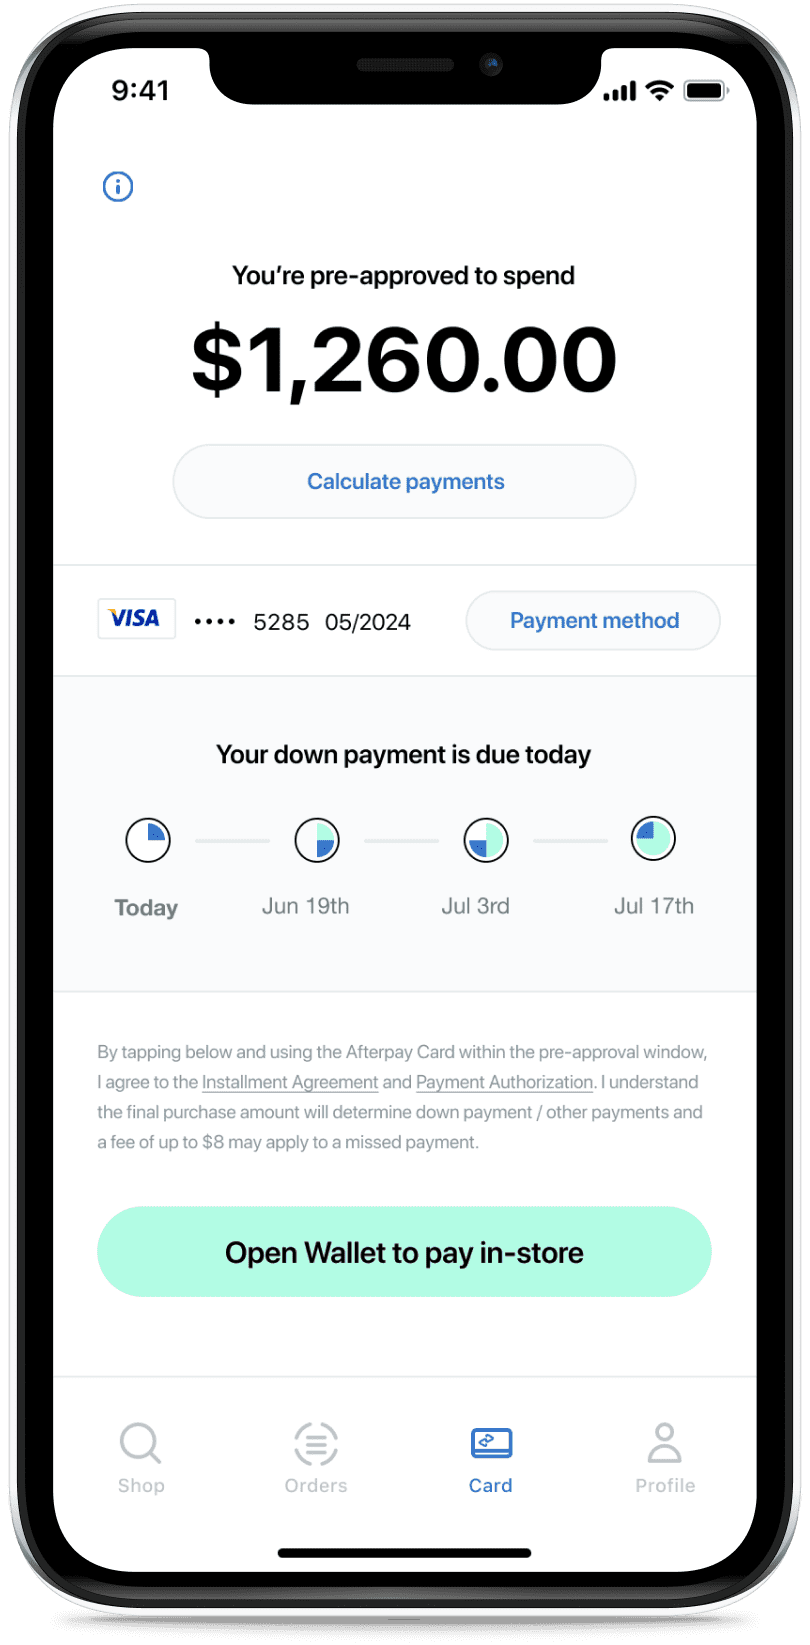 Soon You'll Be Able to Make Afterpay Payments on Cash App